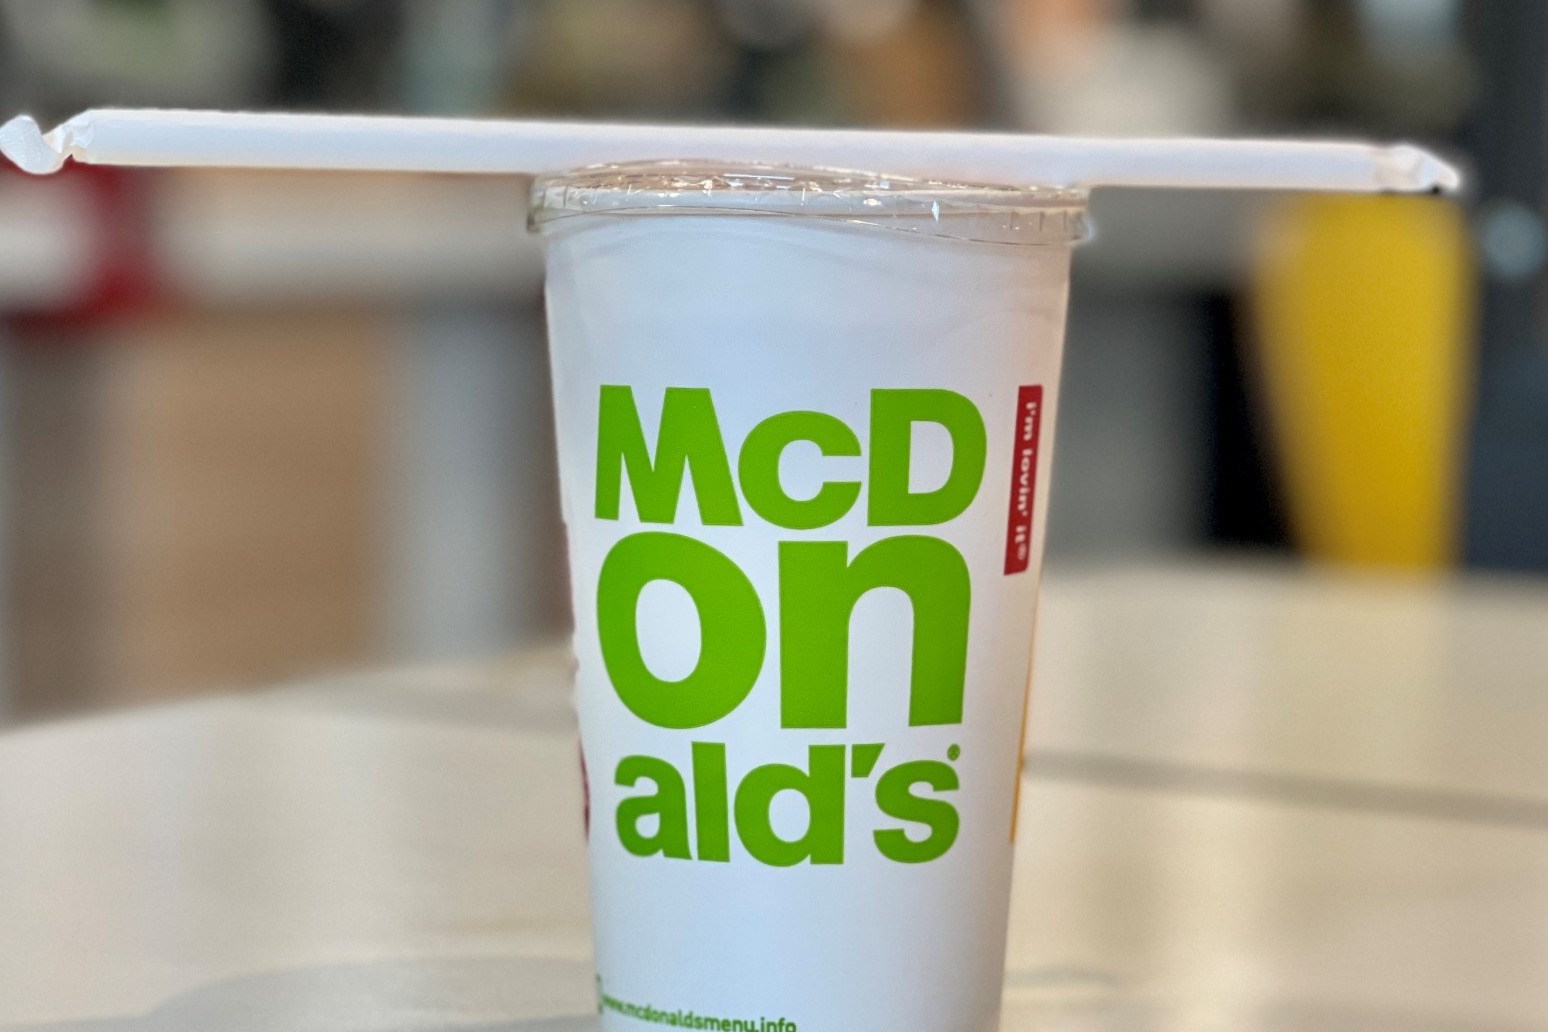 Milkshakes off the menu as McDonald’s hit by supply chain issues 